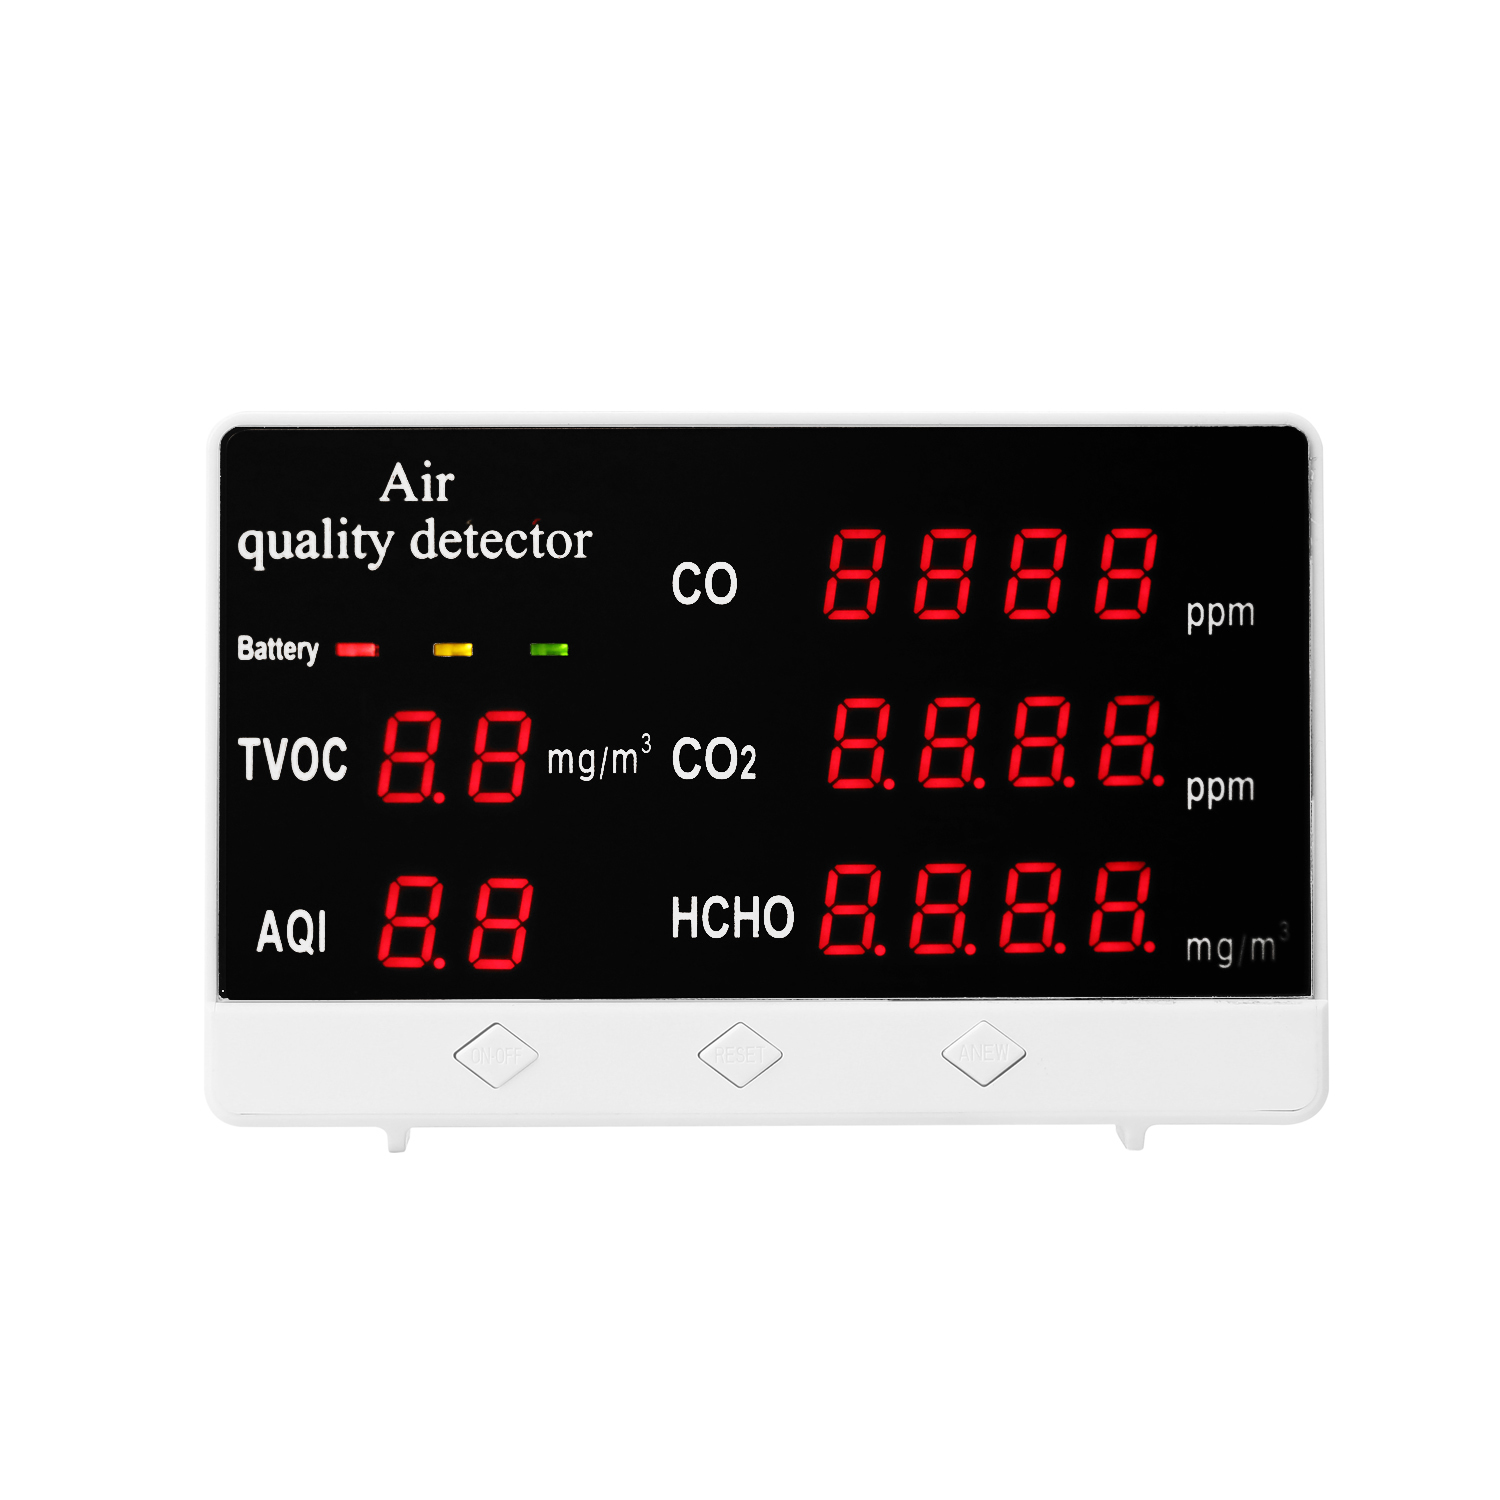 KKMOON Digital Indoor/Outdoor CO/HCHO/TVOC Tester CO2 Meter Air Quality Monitor Detector Multifunctional Household Gas Analyzer